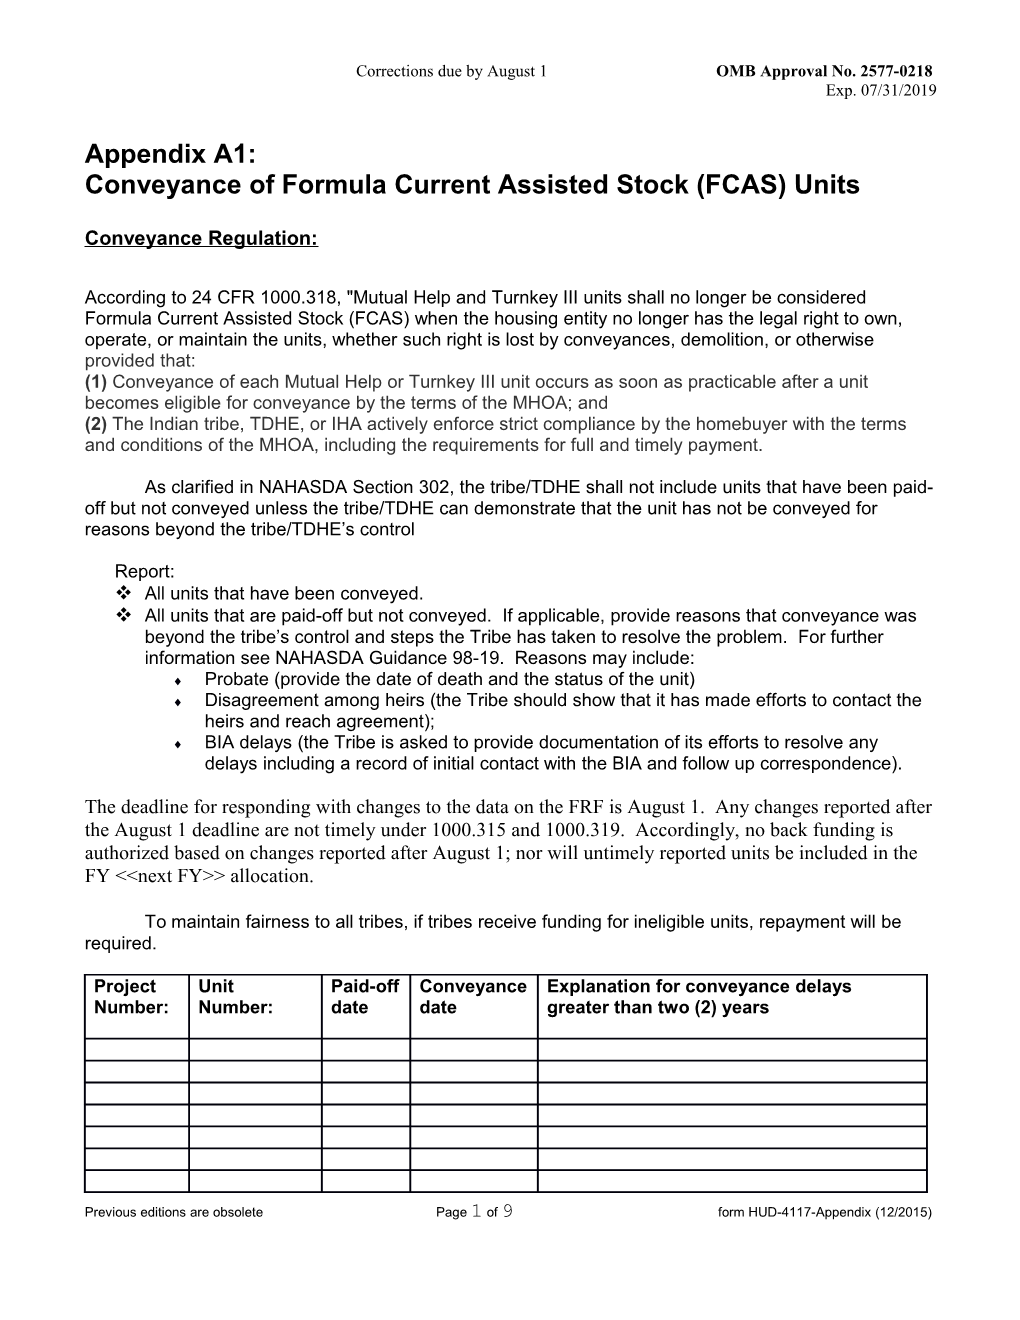 Conveyance of Formula Current Assisted Stock (FCAS) Units